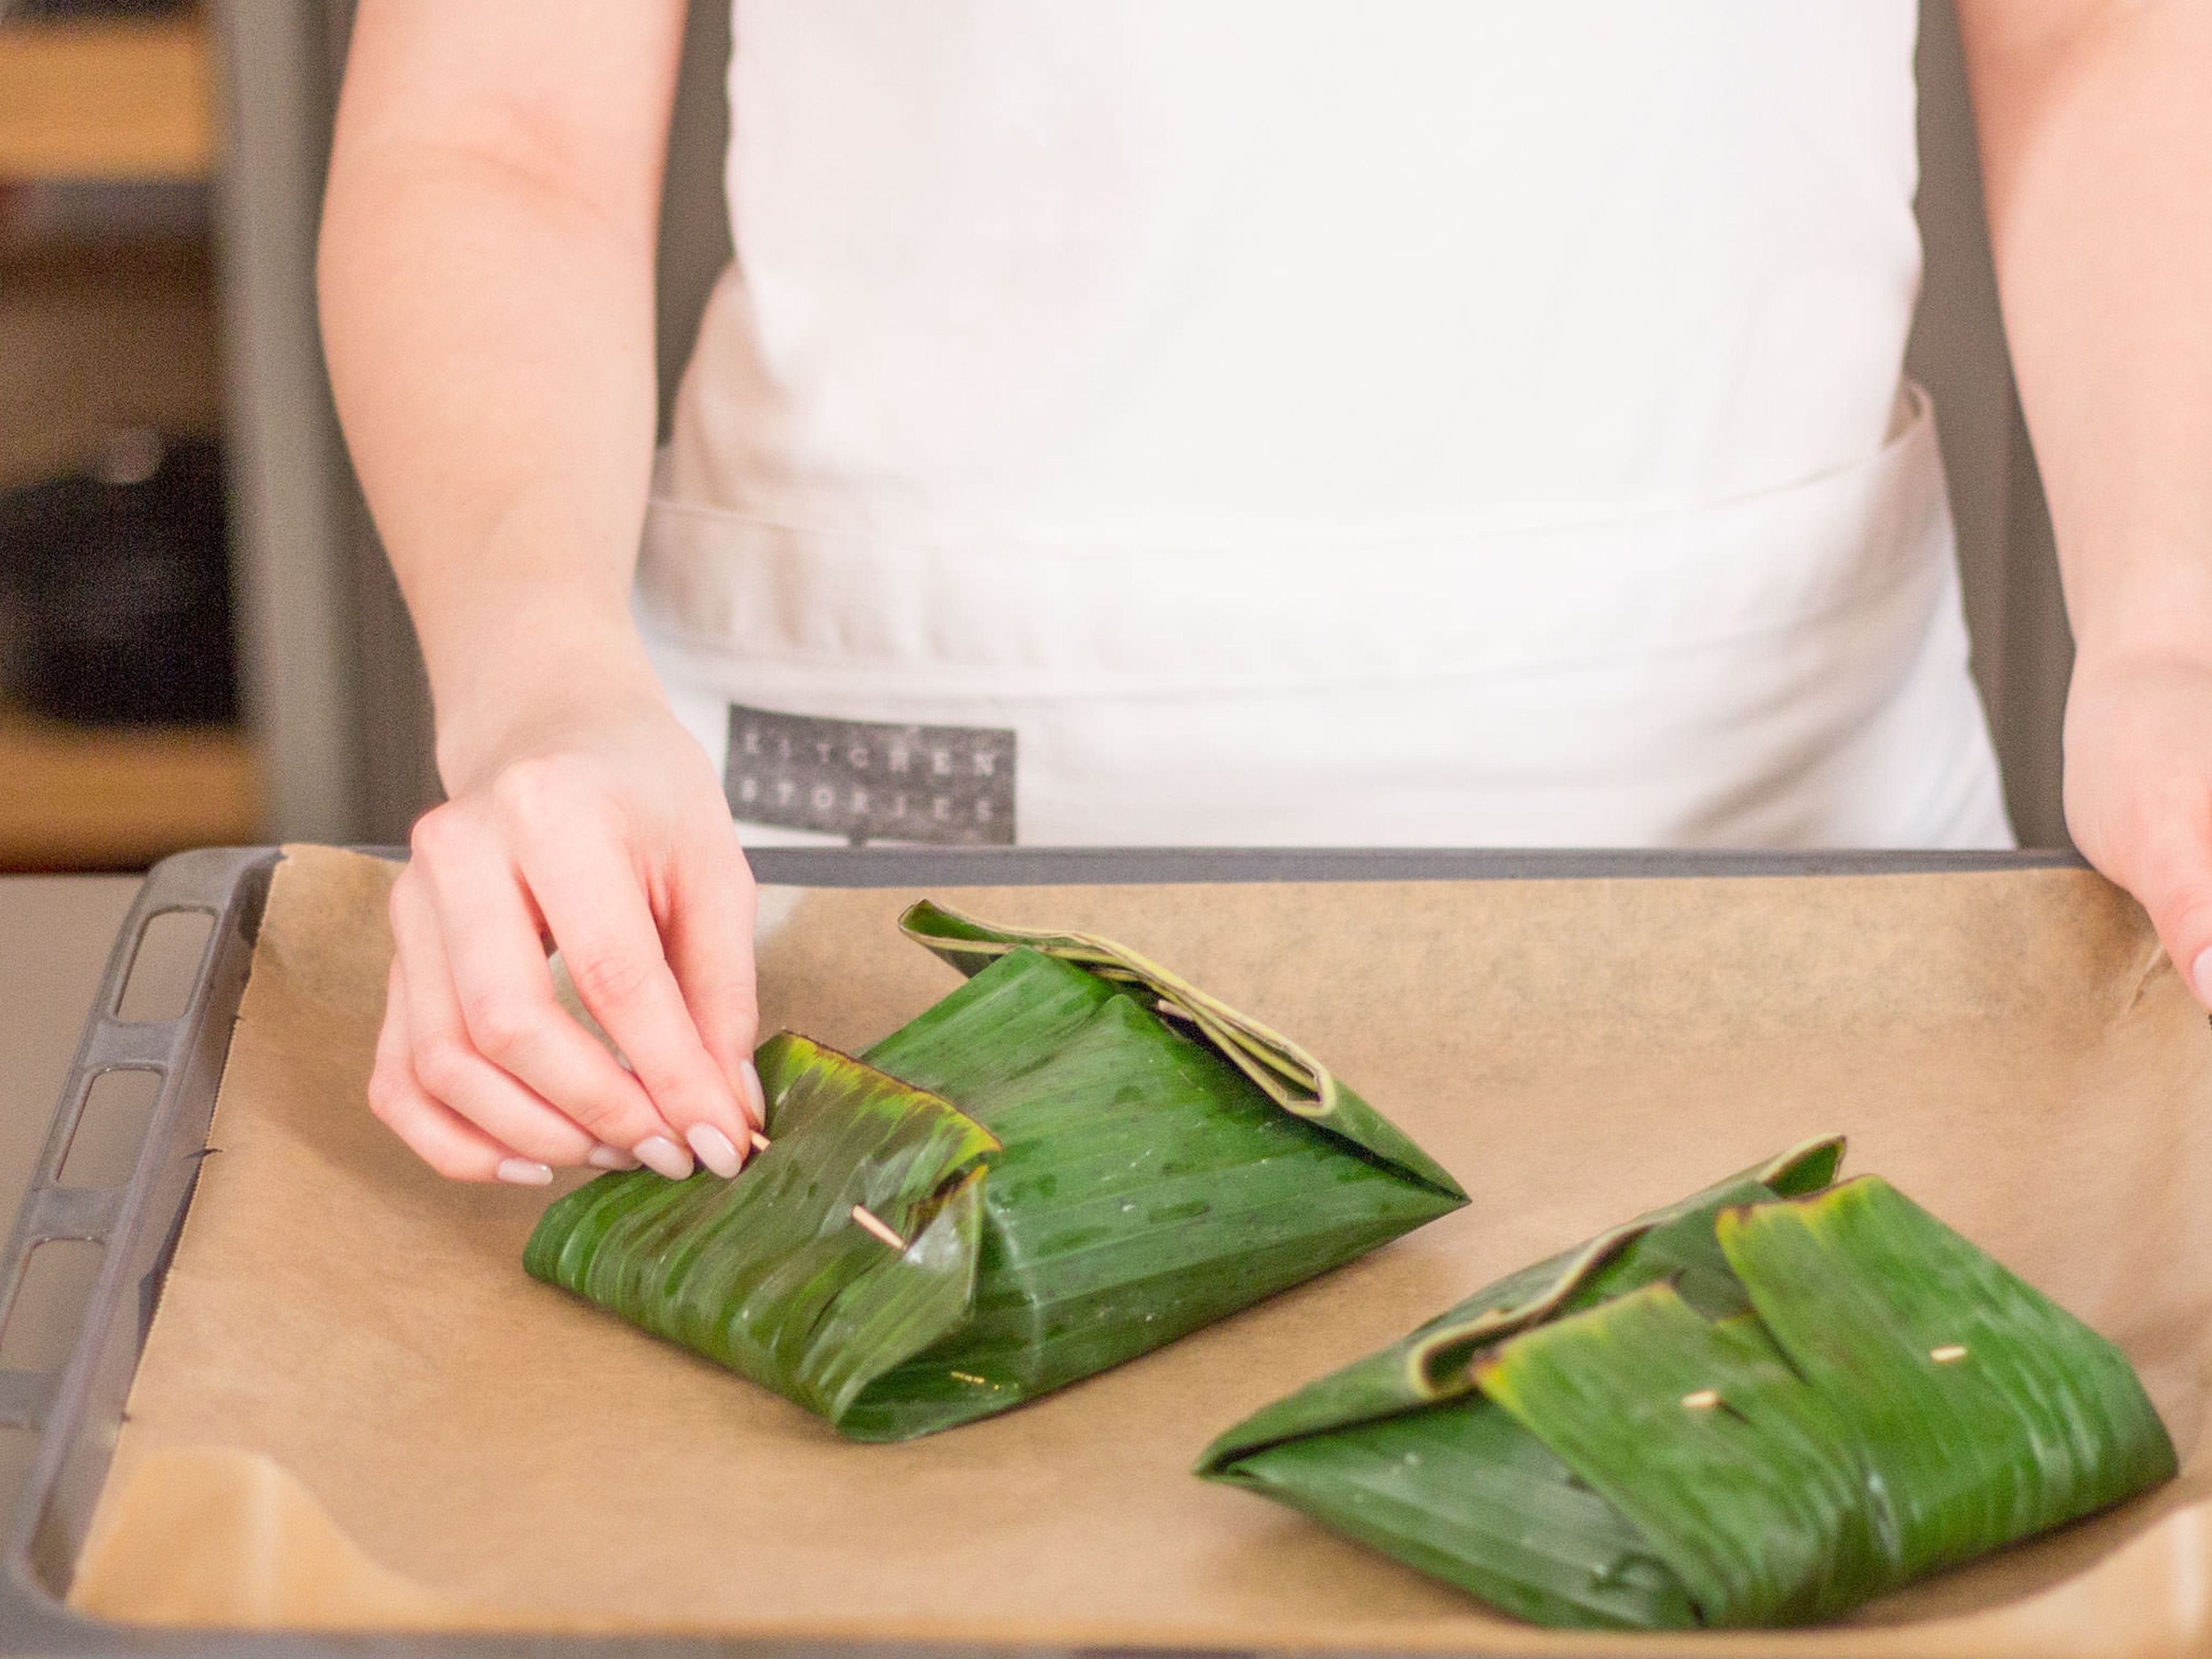 Fold banana leaves until all sides of cod fish are covered. Use toothpicks to secure the leaves. Bake in the oven at 180°C/350°F for approx. 30 min.